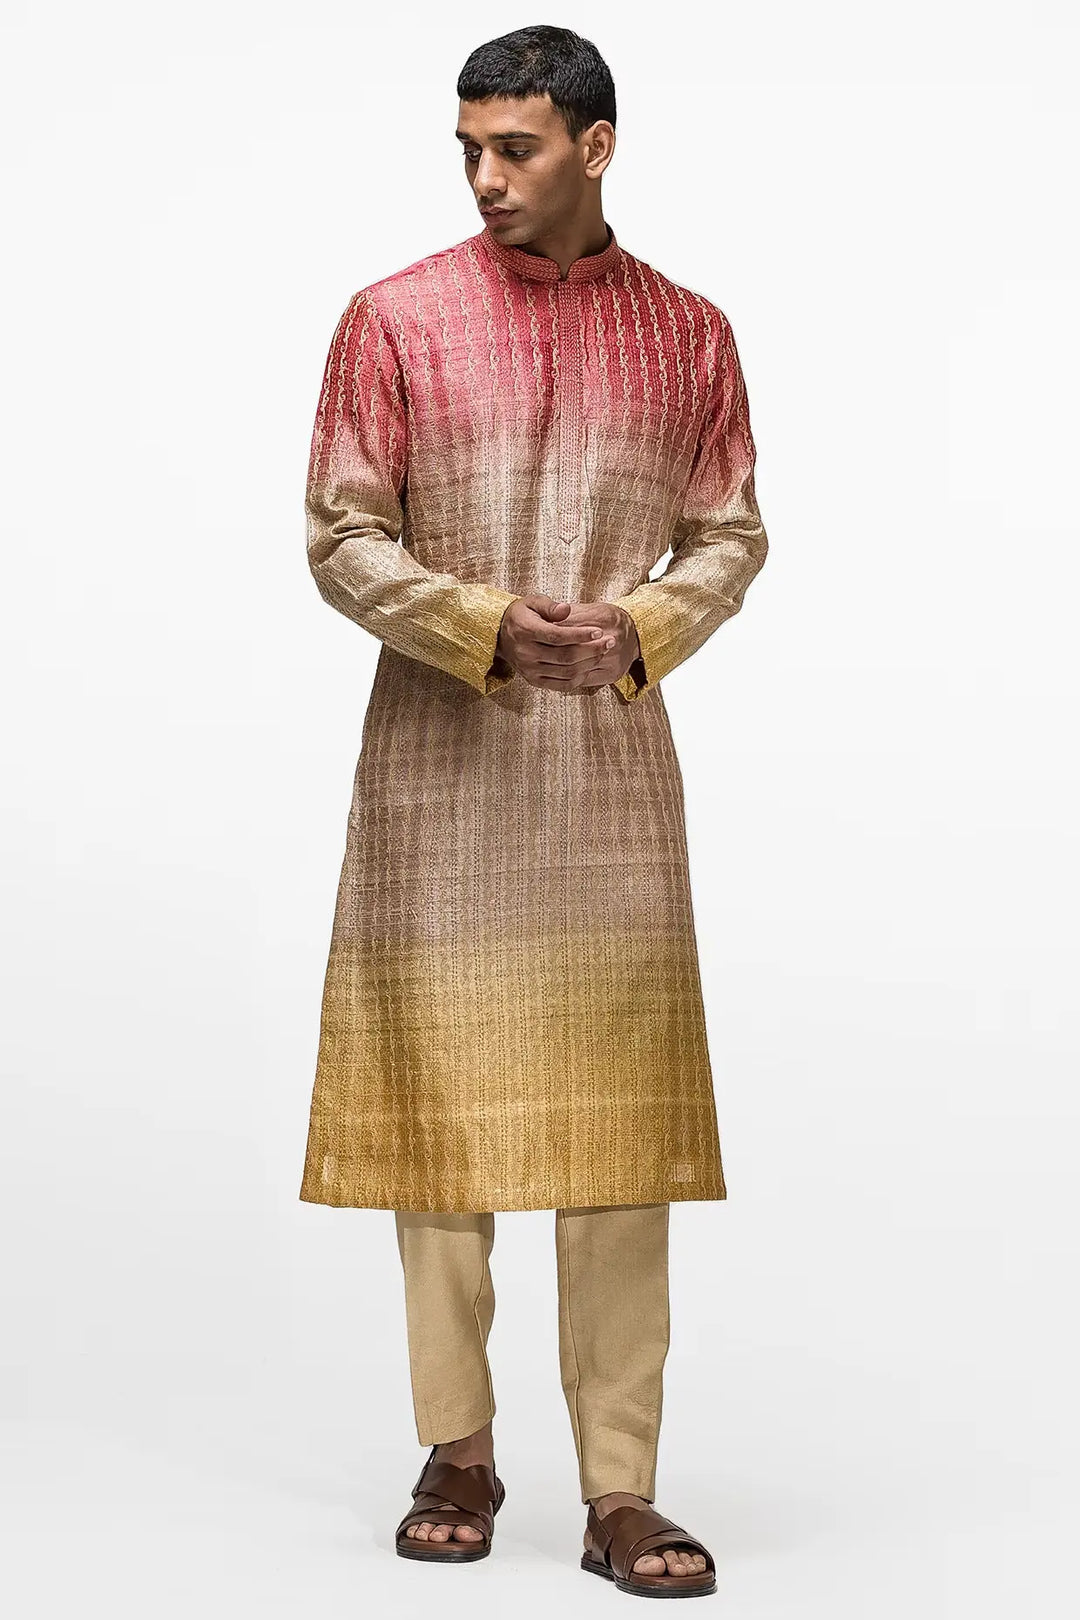 Ombre Dyed Thread Embroidery Kurta - Asuka Couture